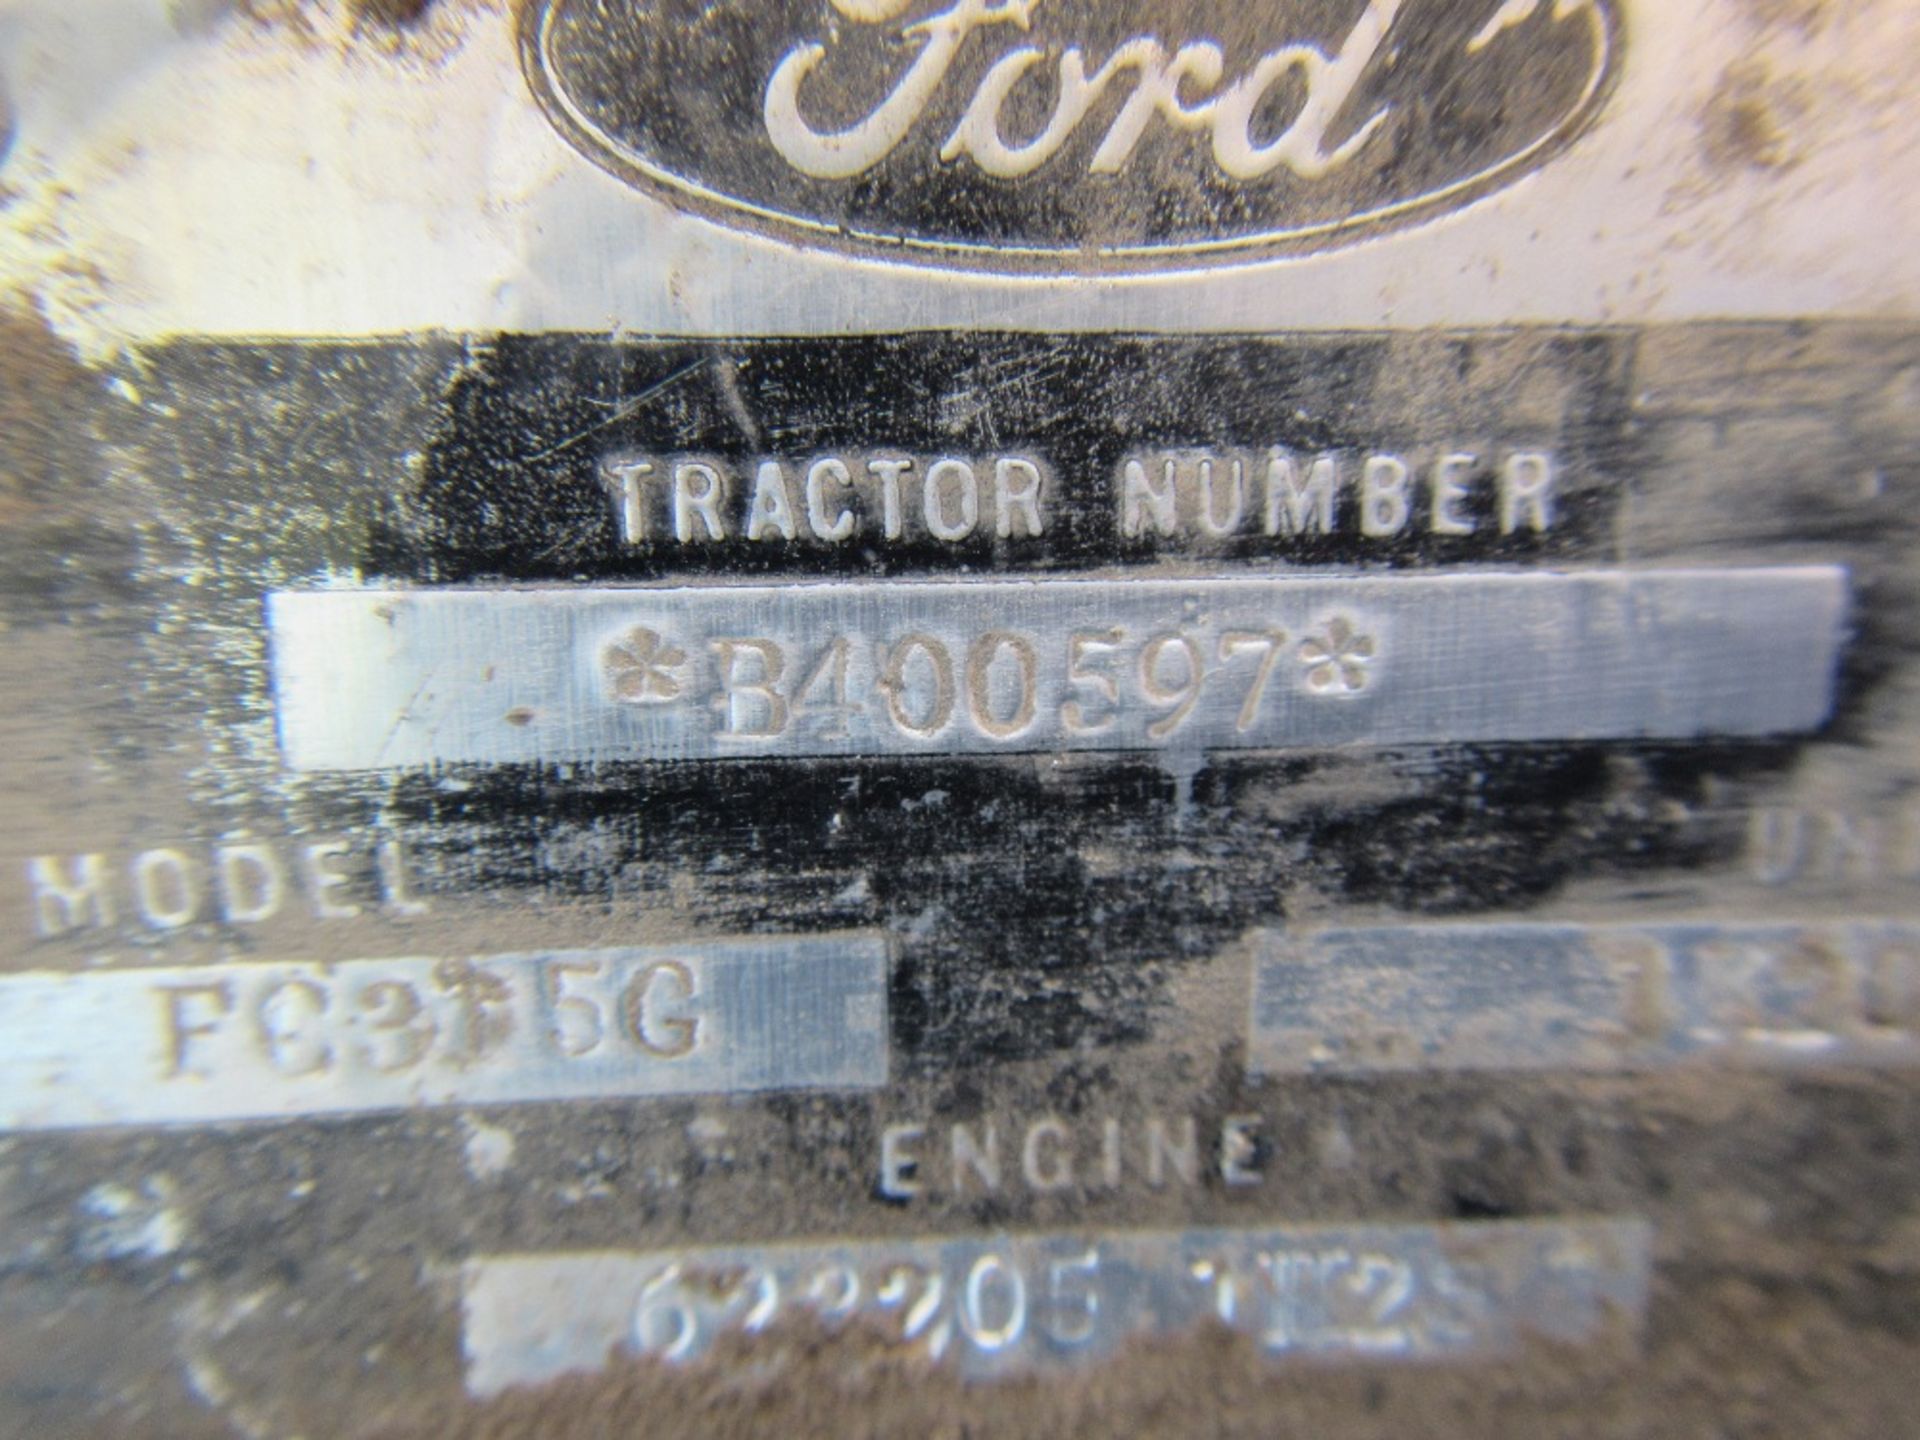 Ford 7710 2wd Tractor. Ser. No. B400597 - Image 17 of 18